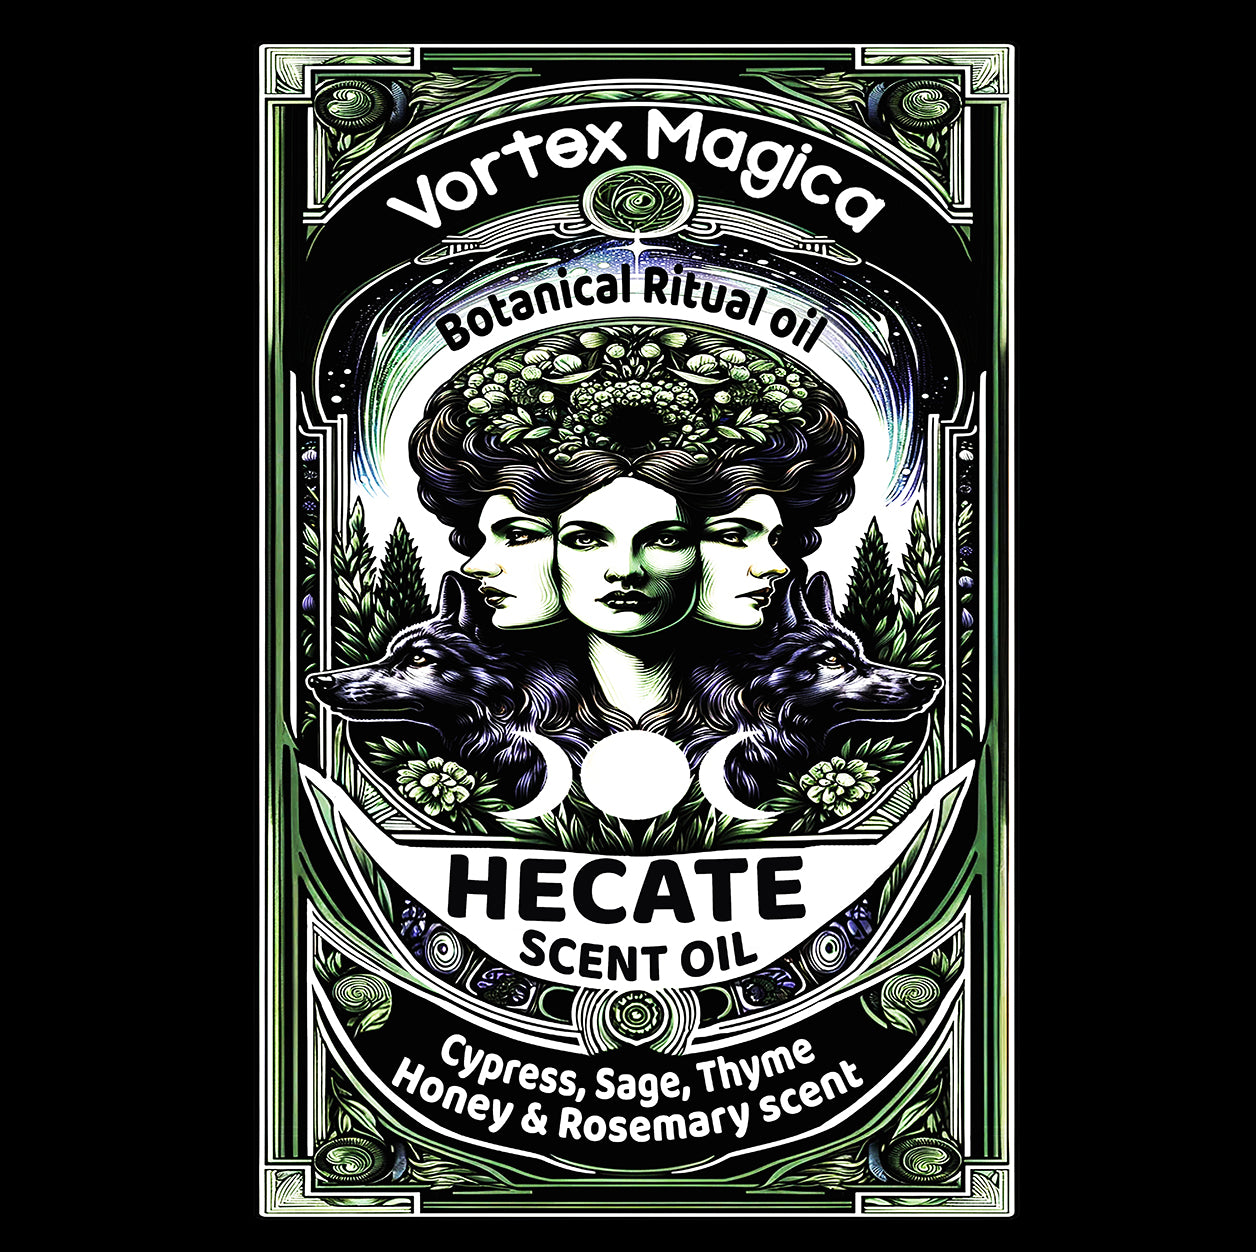 Hecate geur olie/ Hecate scent oil